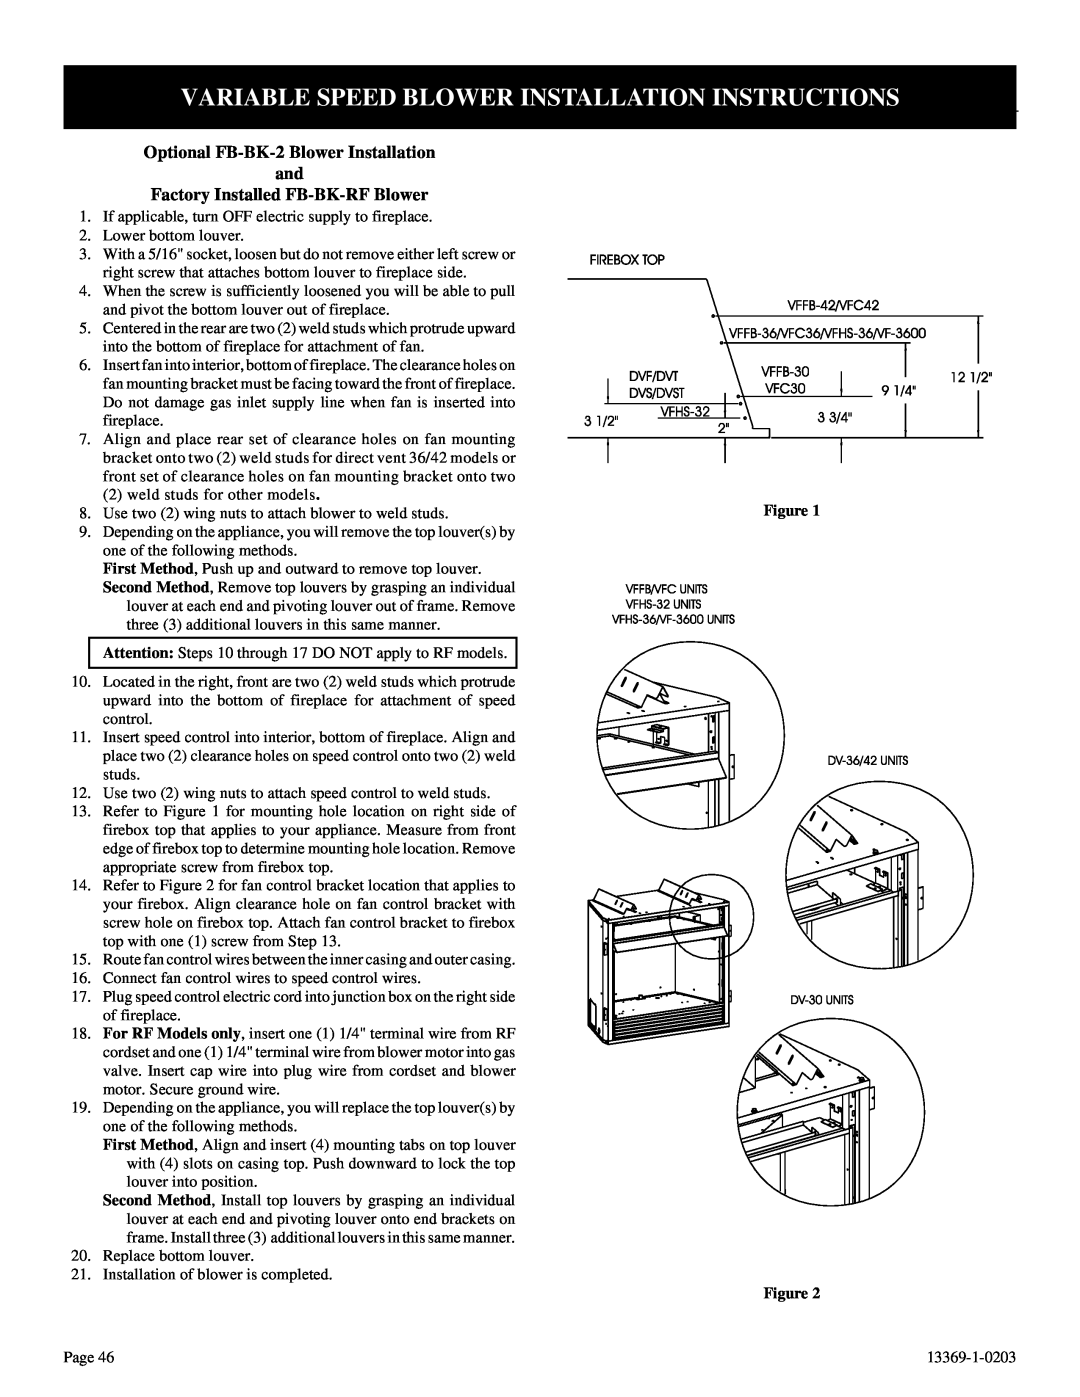 DVS 30-2 Variable Speed Blower Installation Instructions, Optional FB-BK-2Blower Installation and, Figure Figure 